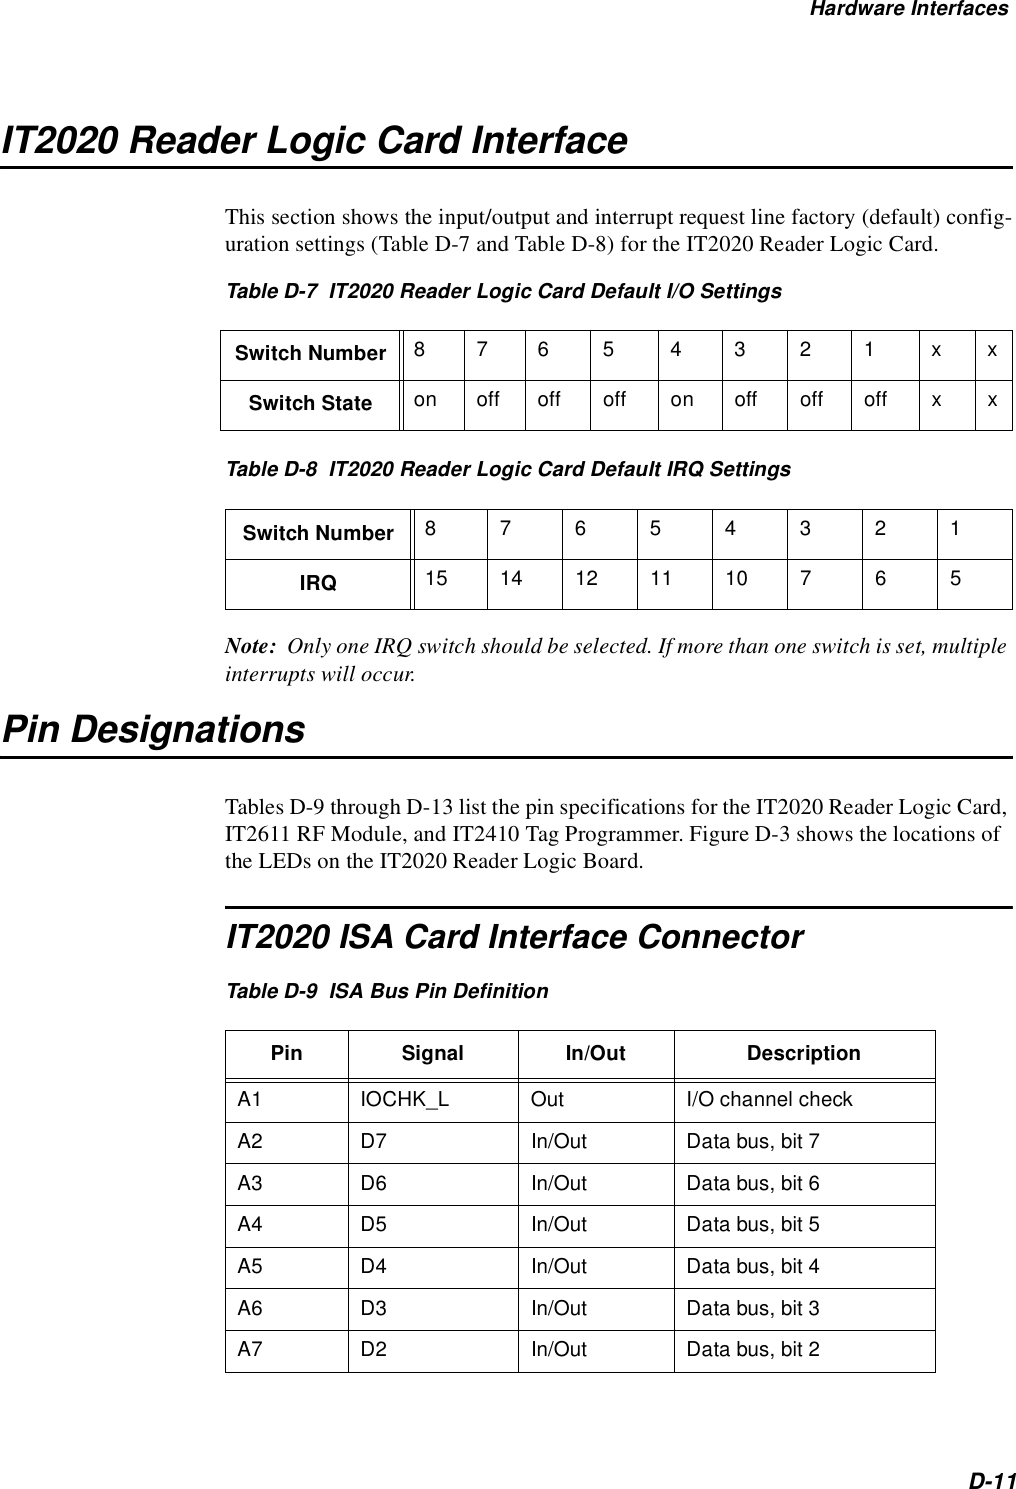 Hardware InterfacesD-11IT2020 Reader Logic Card InterfaceThis section shows the input/output and interrupt request line factory (default) config-uration settings (Table D-7 and Table D-8) for the IT2020 Reader Logic Card.Table D-7  IT2020 Reader Logic Card Default I/O SettingsTable D-8  IT2020 Reader Logic Card Default IRQ SettingsNote:  Only one IRQ switch should be selected. If more than one switch is set, multiple interrupts will occur.Pin DesignationsTables D-9 through D-13 list the pin specifications for the IT2020 Reader Logic Card, IT2611 RF Module, and IT2410 Tag Programmer. Figure D-3 shows the locations of the LEDs on the IT2020 Reader Logic Board.IT2020 ISA Card Interface ConnectorSwitch Number 8765 4321 xxSwitch State on off off off on off off off x xSwitch Number 87654321IRQ 15 14 12 11 10 7 6 5Table D-9  ISA Bus Pin DefinitionPin Signal In/Out DescriptionA1 IOCHK_L Out I/O channel checkA2 D7 In/Out Data bus, bit 7A3 D6 In/Out Data bus, bit 6A4 D5 In/Out Data bus, bit 5A5 D4 In/Out Data bus, bit 4A6 D3 In/Out Data bus, bit 3A7 D2 In/Out Data bus, bit 2